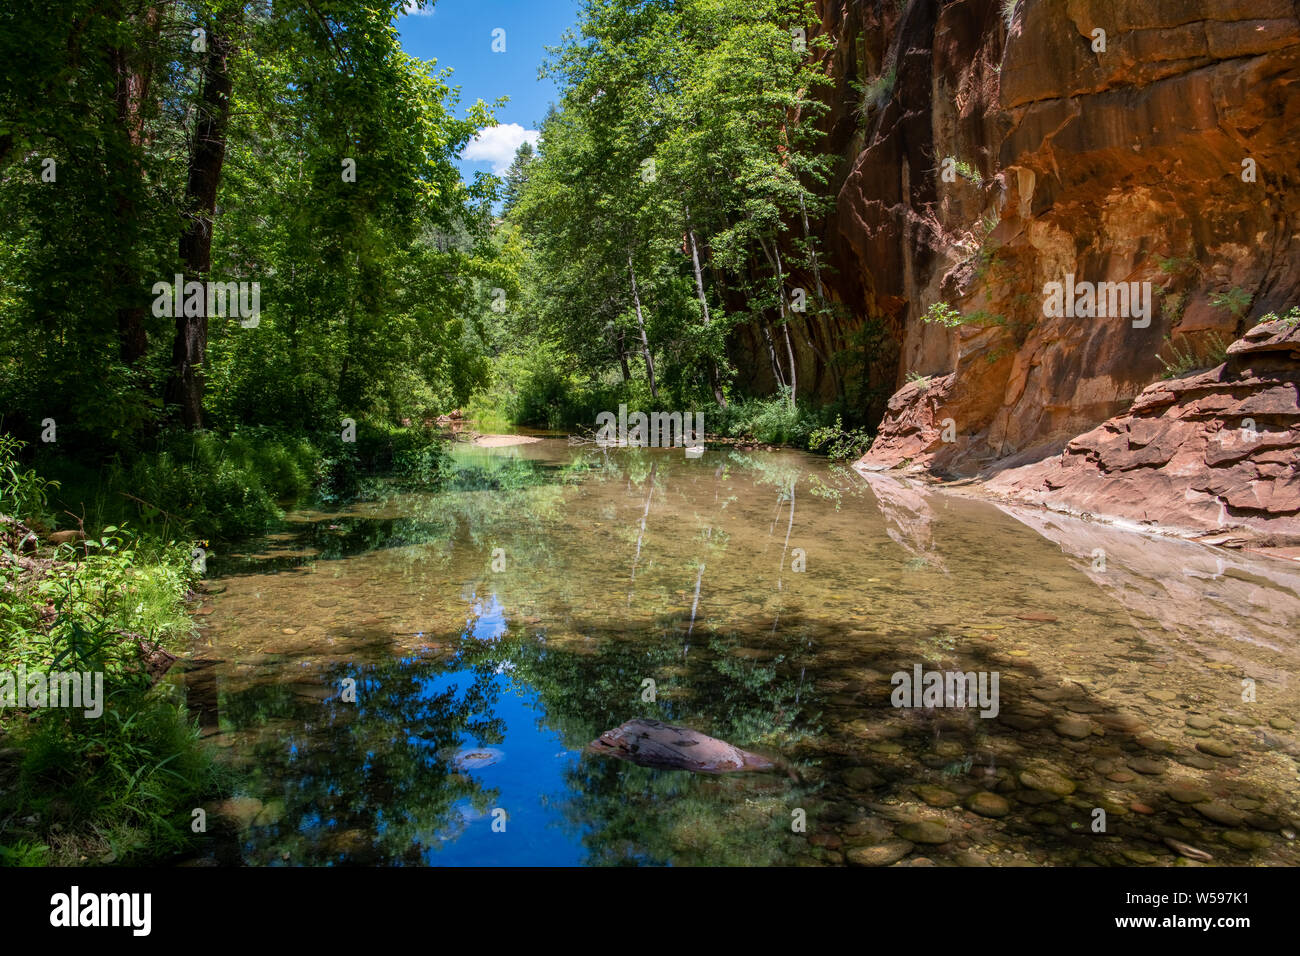 Peaceful scene of a clear, still stream reflecting a lush green forest in a red rock canyon - Oak Creek in Sedona, Arizona Stock Photo